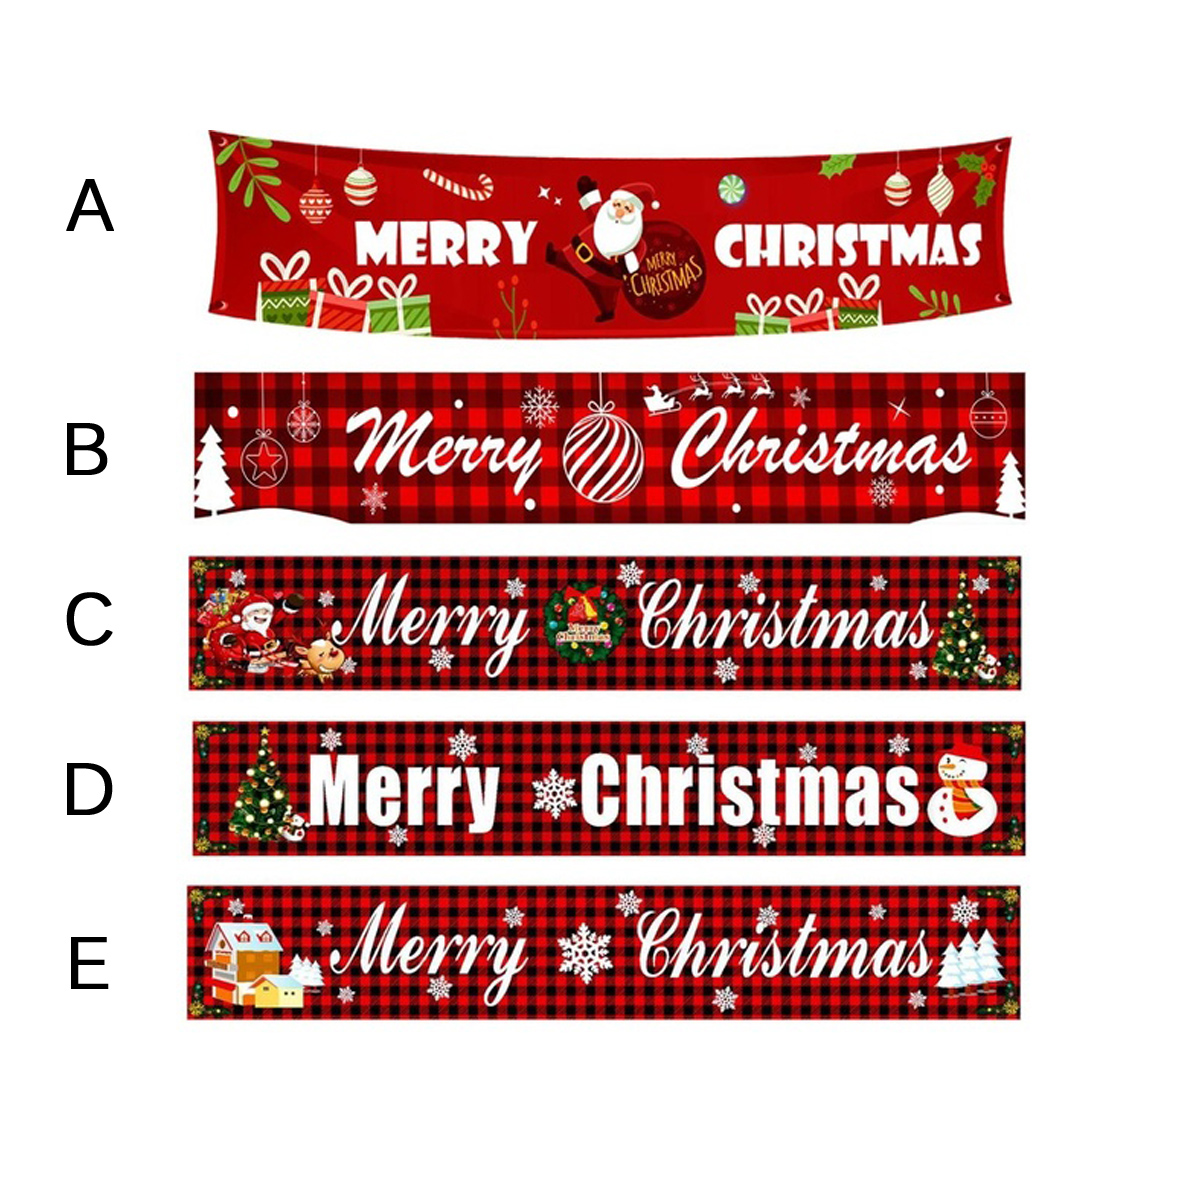 3M-Merry-Christmas-Outdoor-Banner-Oxford-Large-Hanging-Bunting-Xmas-Door-Wall-Decoration-Photography-1764541-2